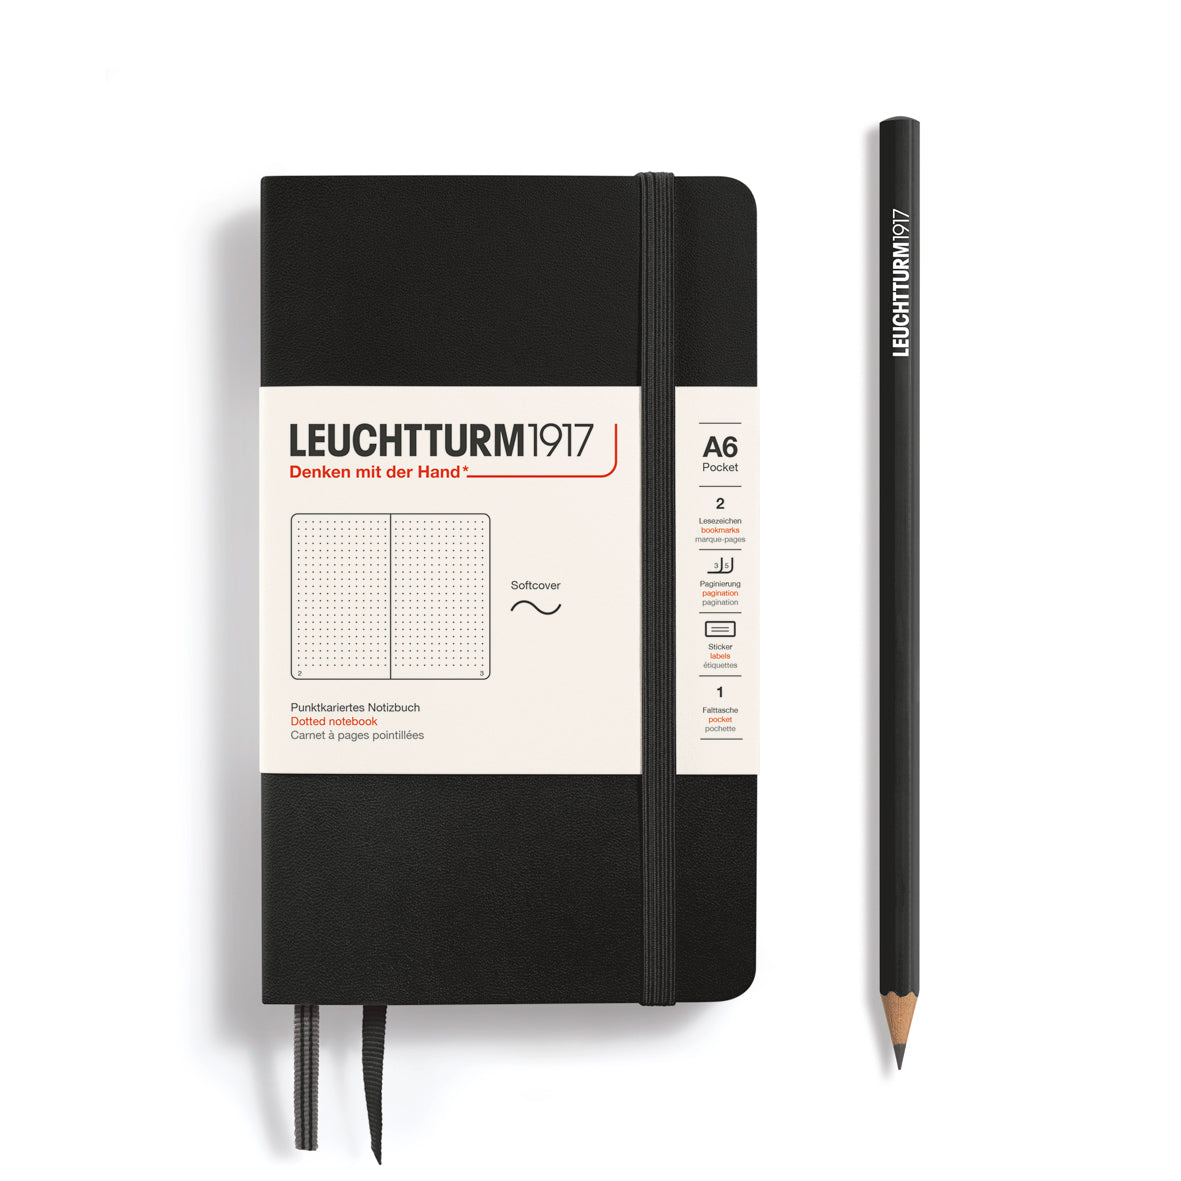 Leuchtturm1917 Softcover Pocket Notebook A6 Dotted, Black - Blesket Canada